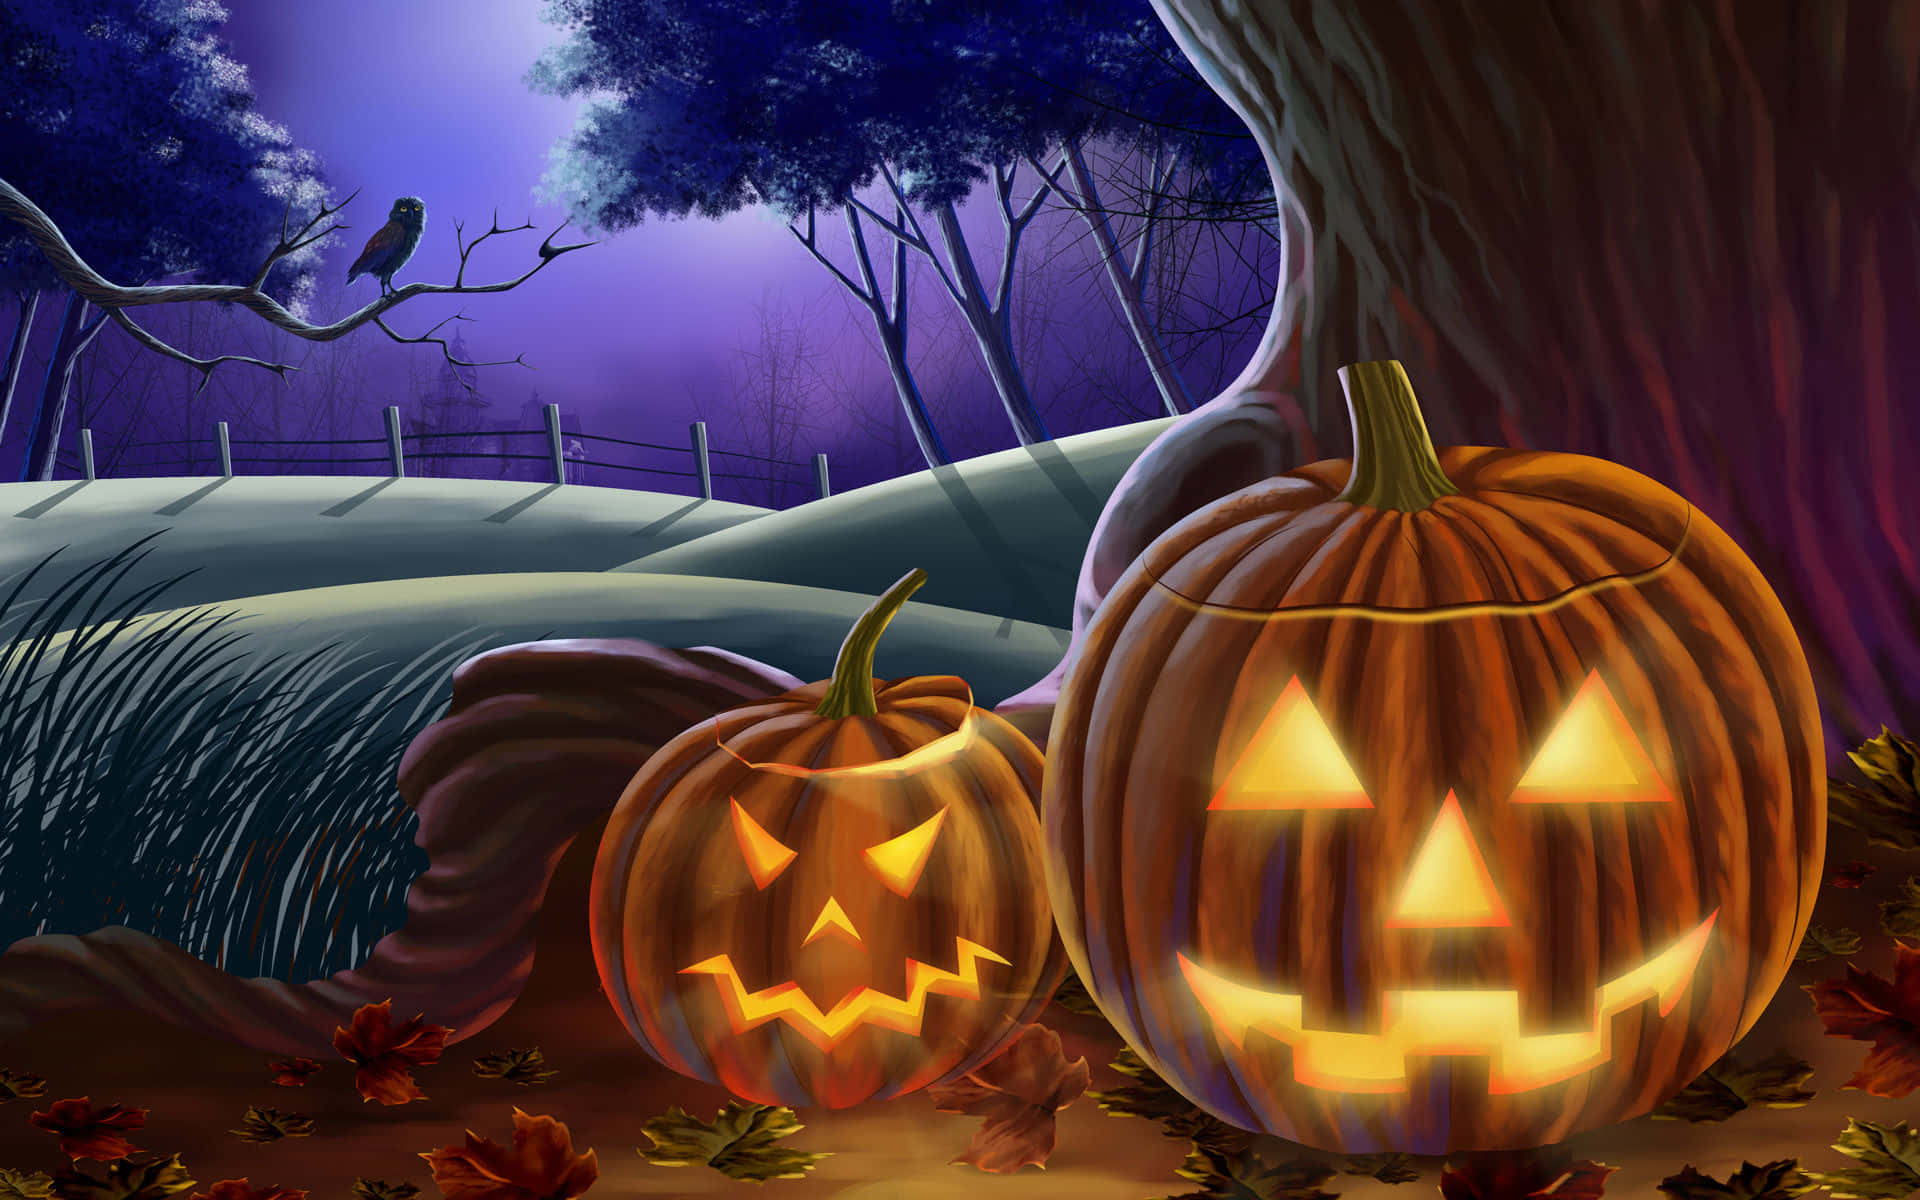 "A Beautiful Autumnal Scene with a Decorated Pumpkin"